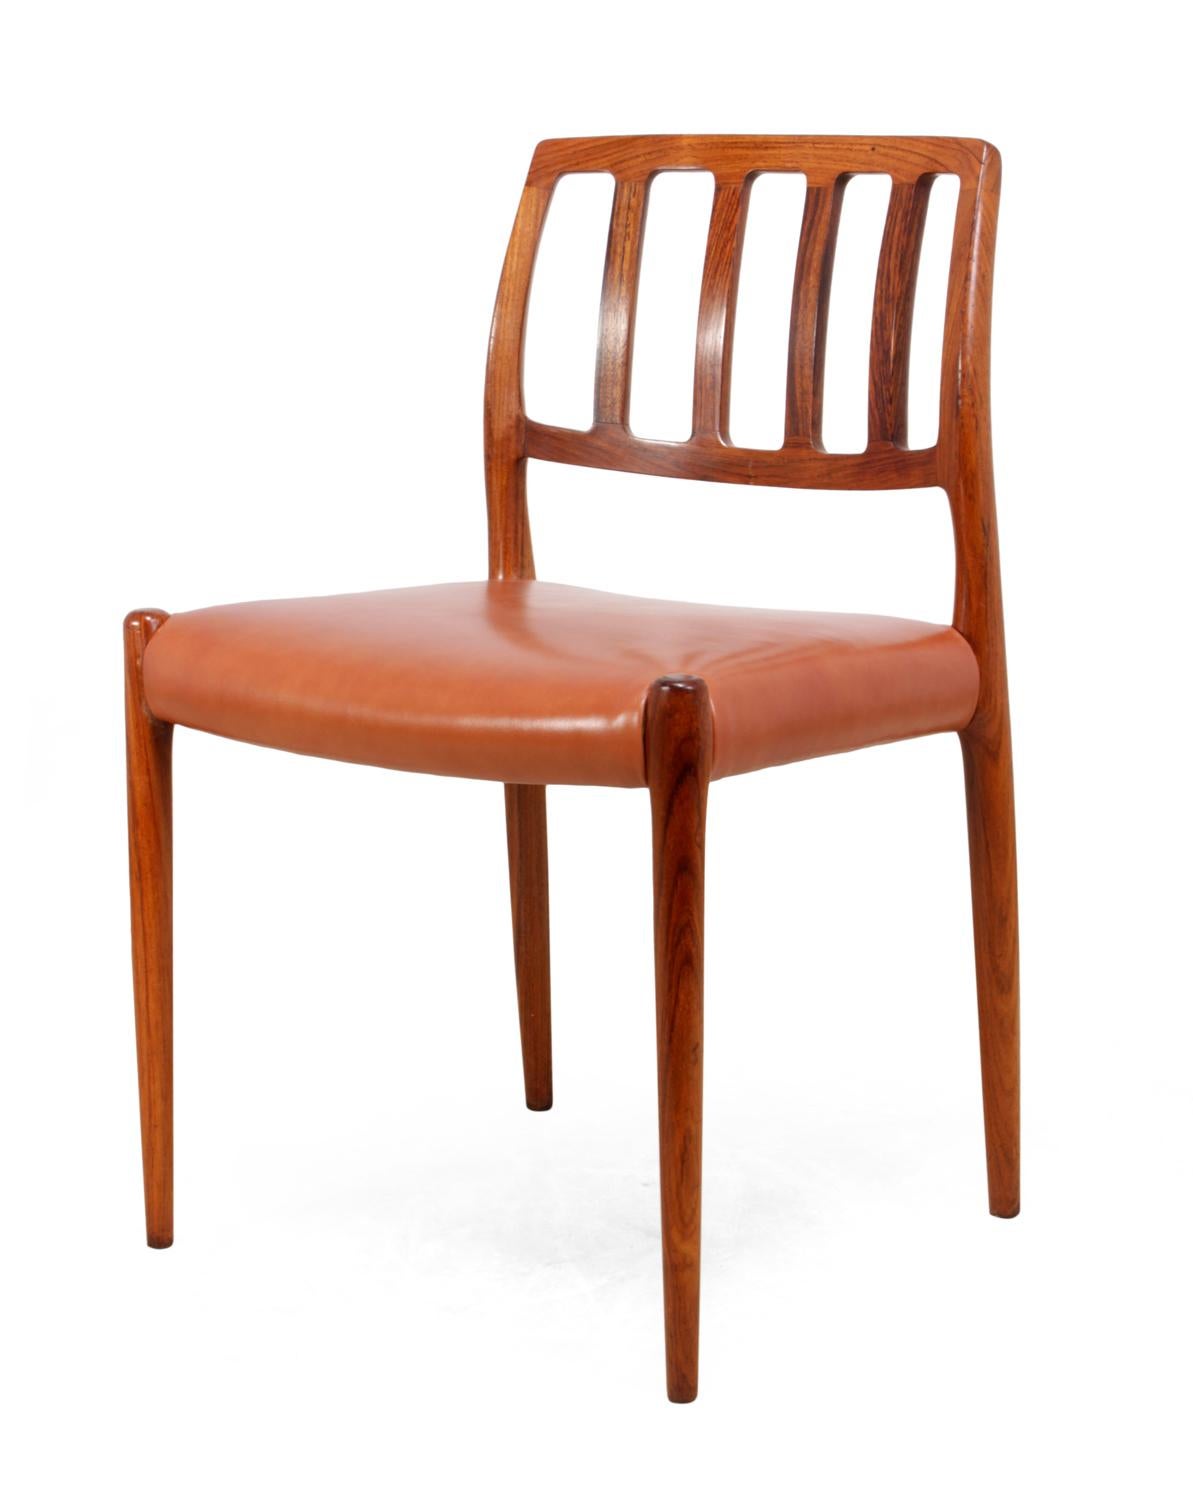 Midcentury Rosewood Dining Chairs by Moller Model 83 2